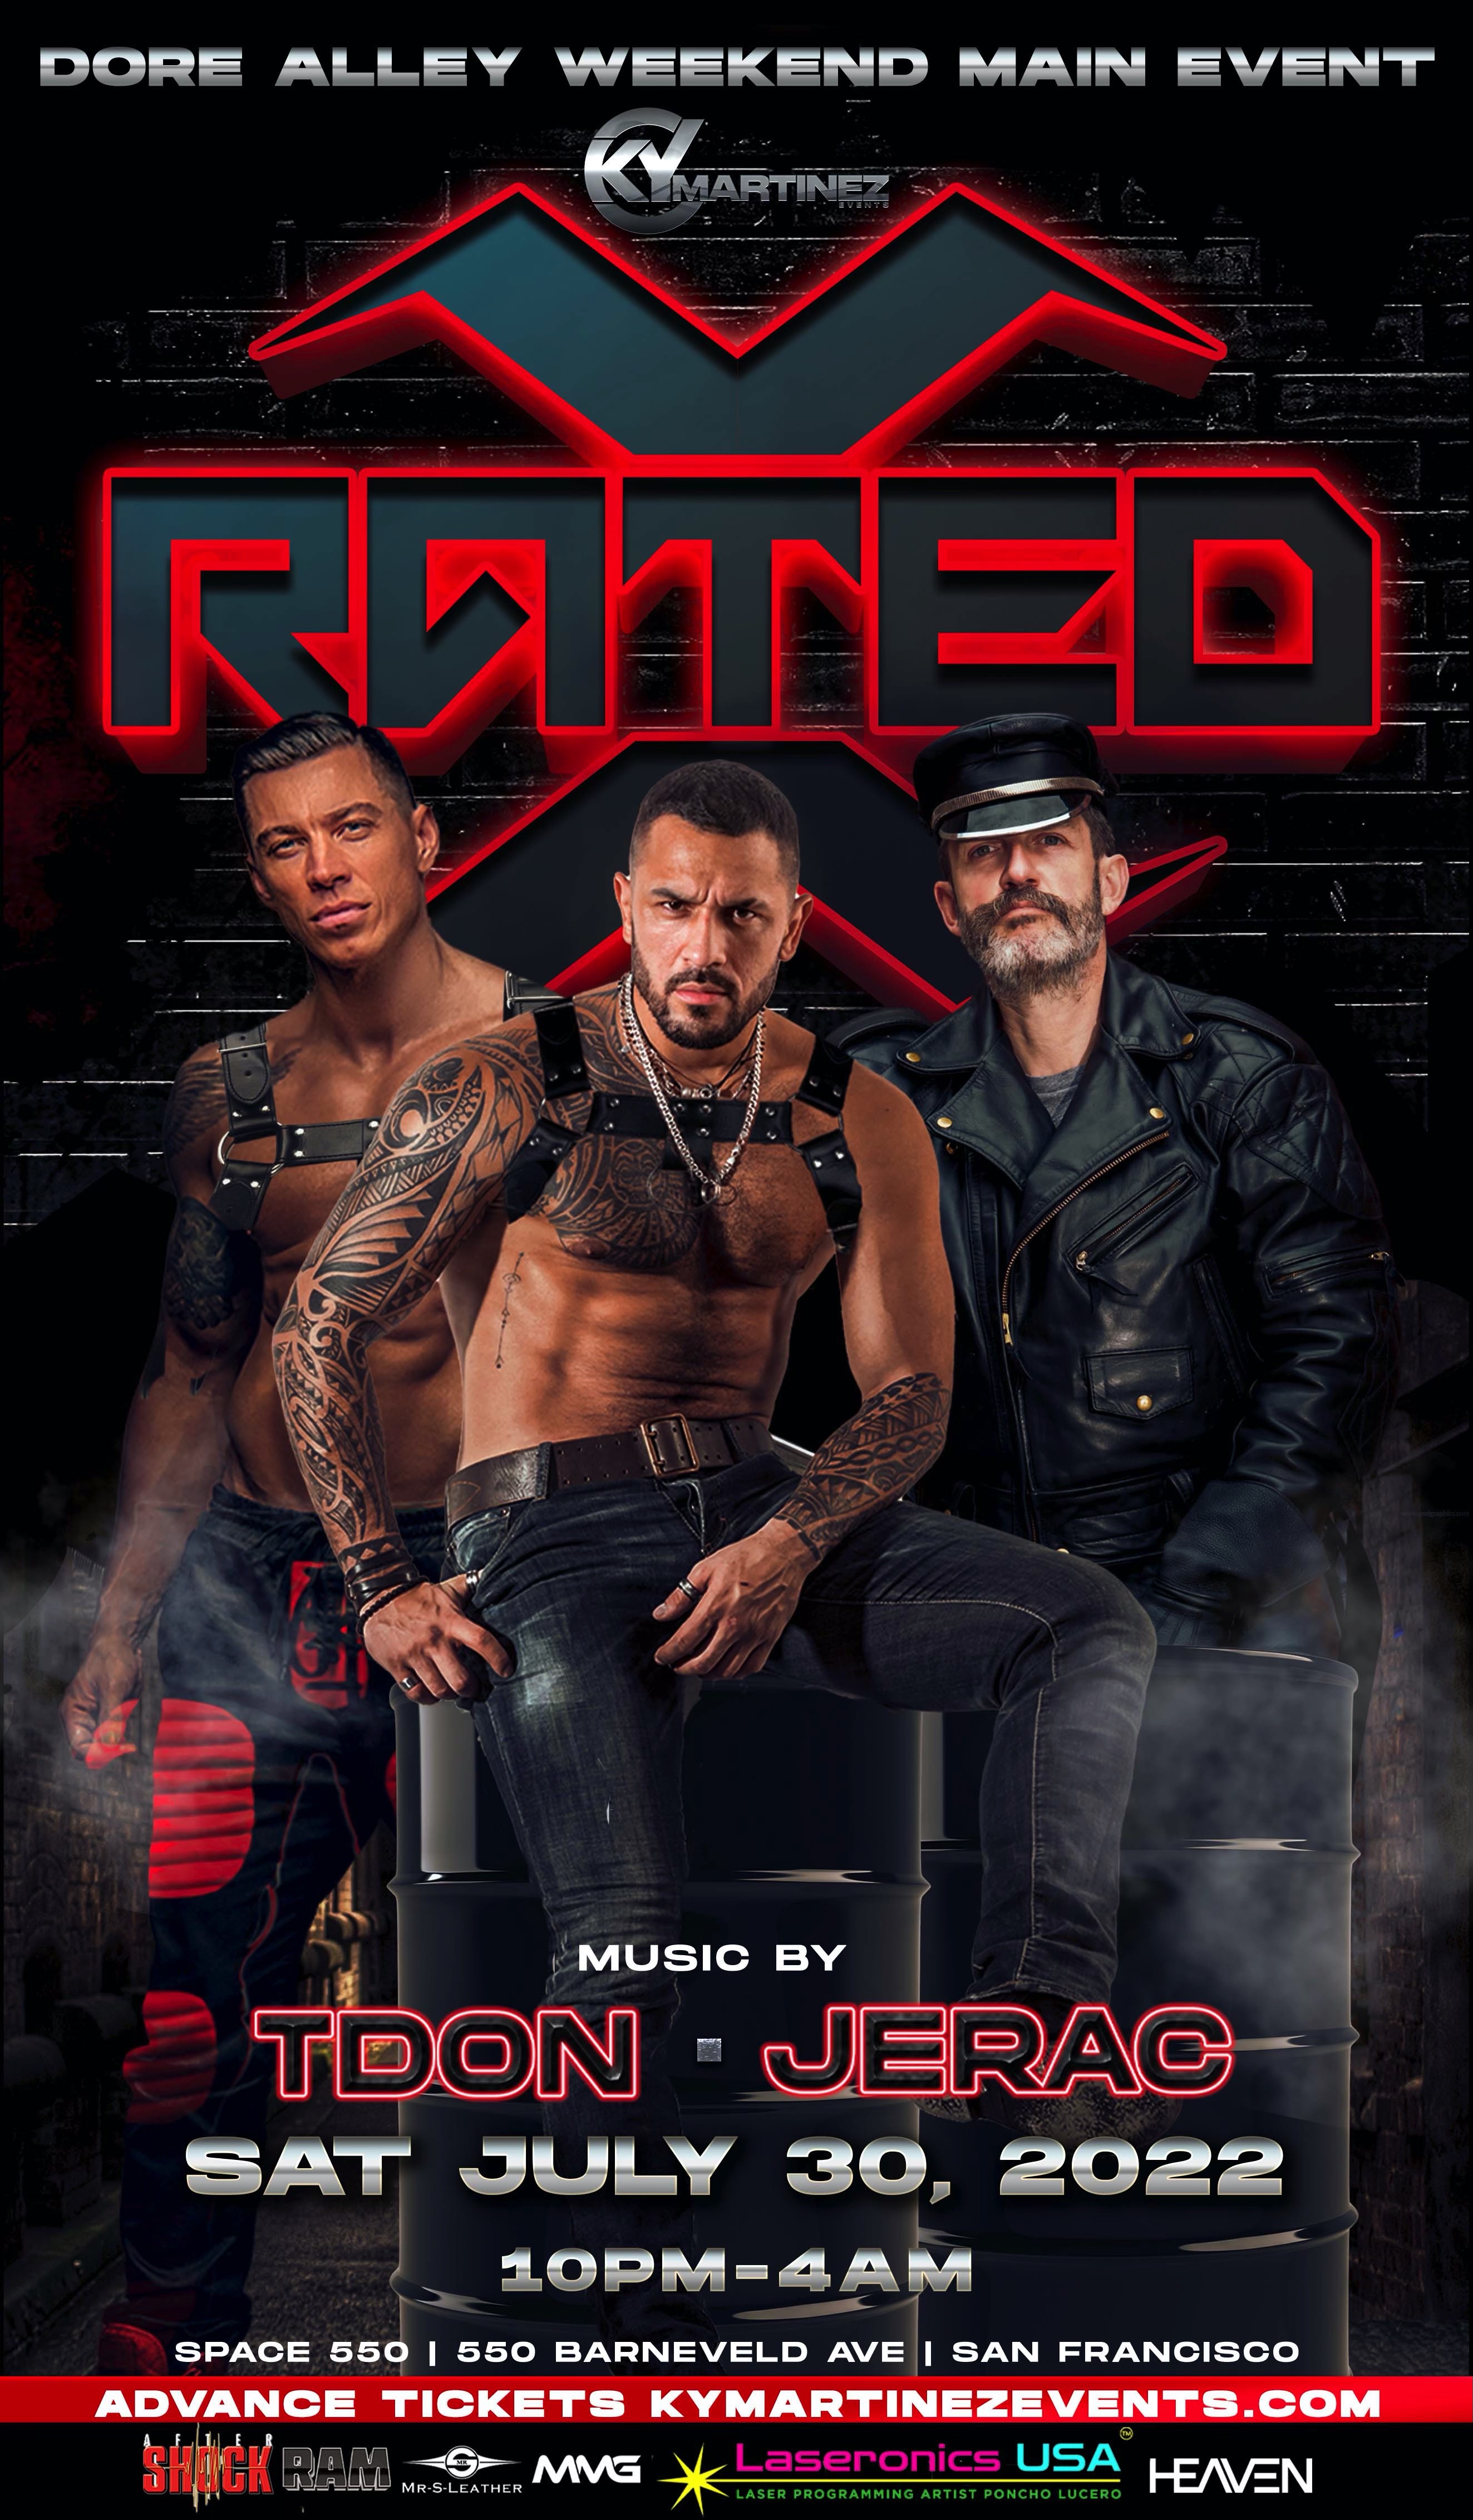 Buy Tickets to RATED X (Up your alley MAIN EVENT) in San Francisco on